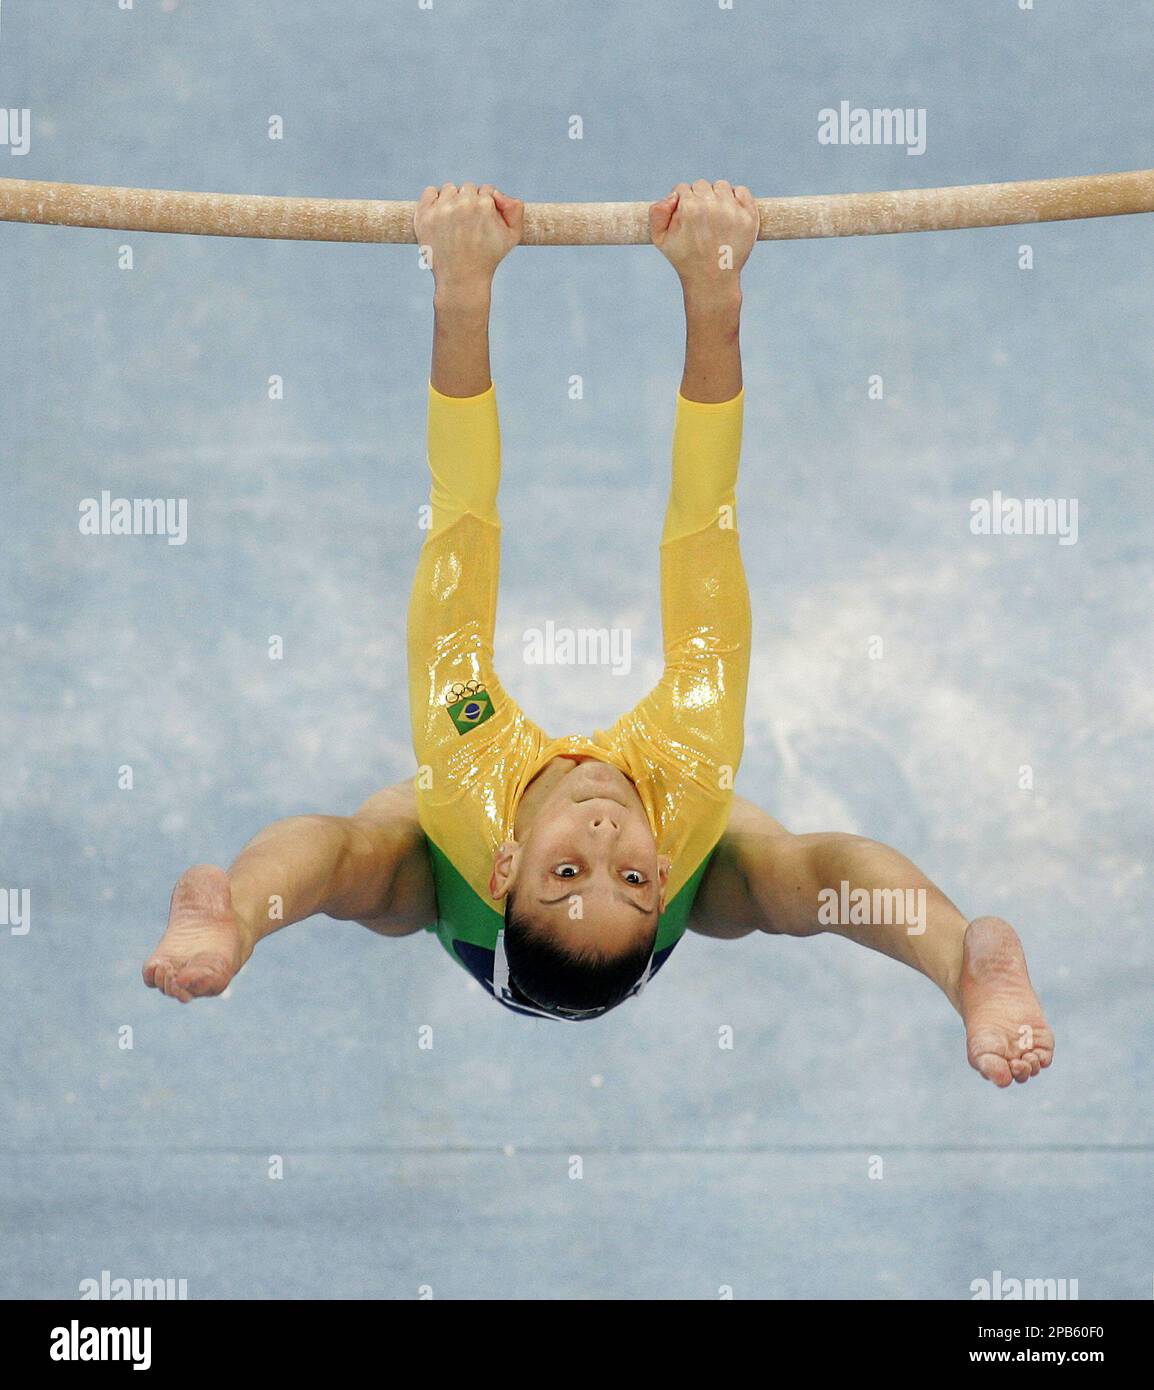 Brazil's Ana Claudia Silva competes at the uneven bars during a qualification of the Gymnastics World Championships in Stuttgart, southern Germany, on Sunday, Sept. 2, 2007. The 40th Gymnastics World Championships take place in Stuttgart from Sept. 1 to Sept. 9, 2007. (AP Photo/Daniel Maurer) Stock Photo